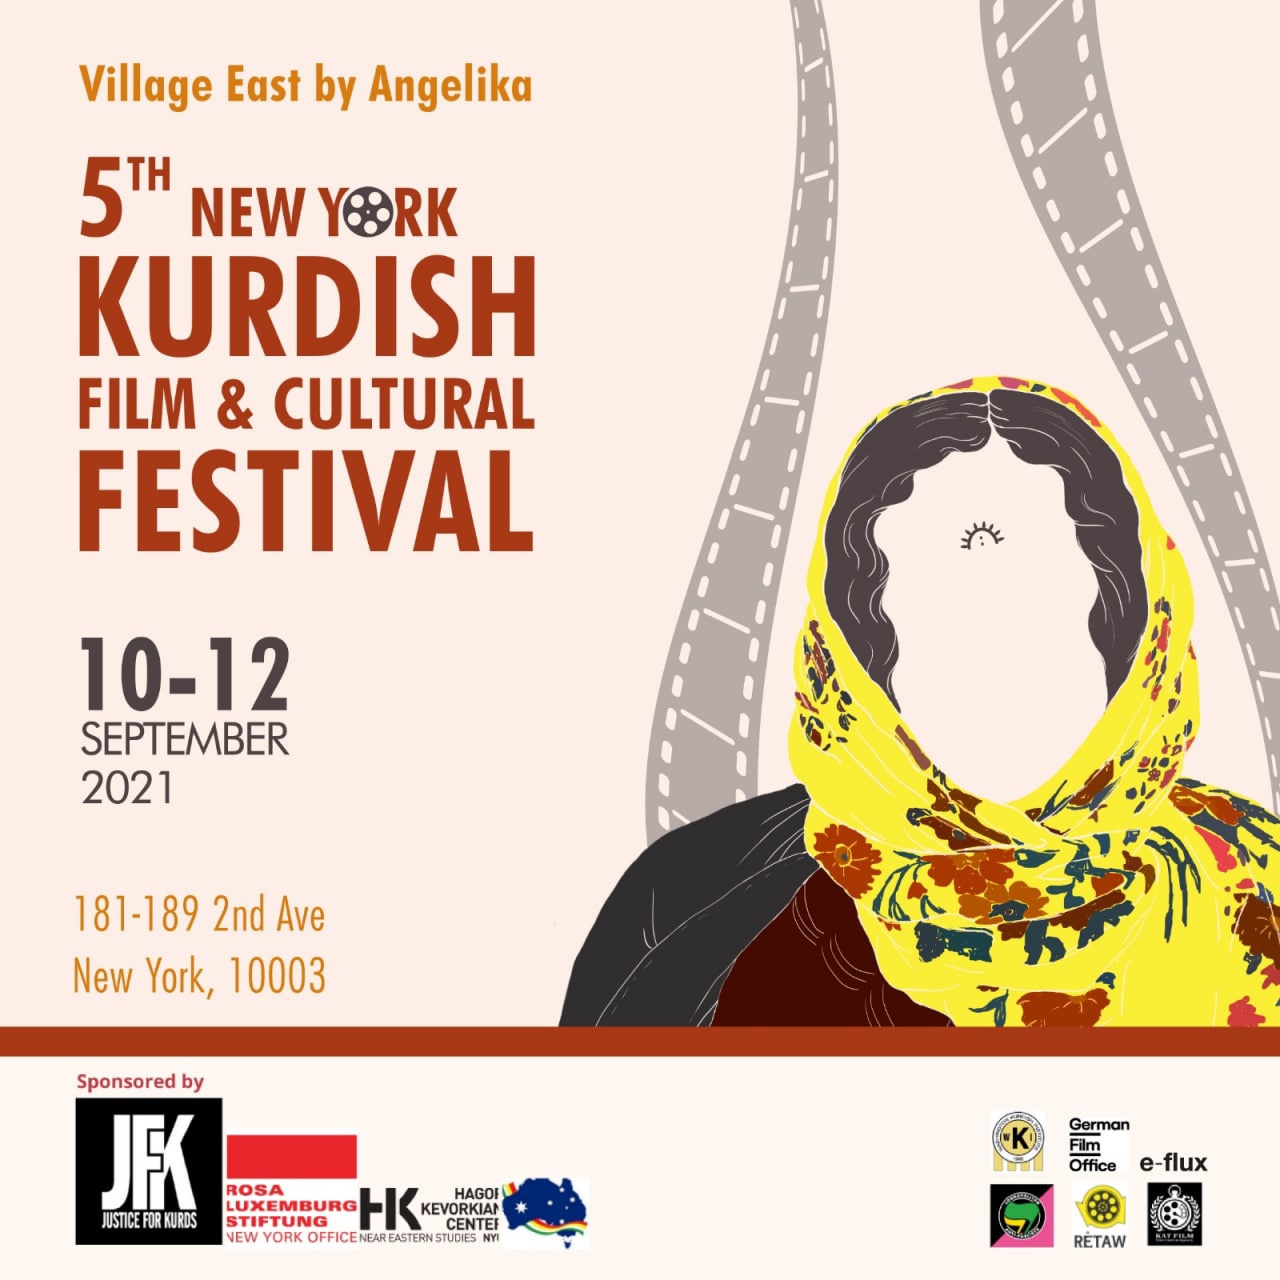 New York Kurdish film and cultural festival holding its fifth edition